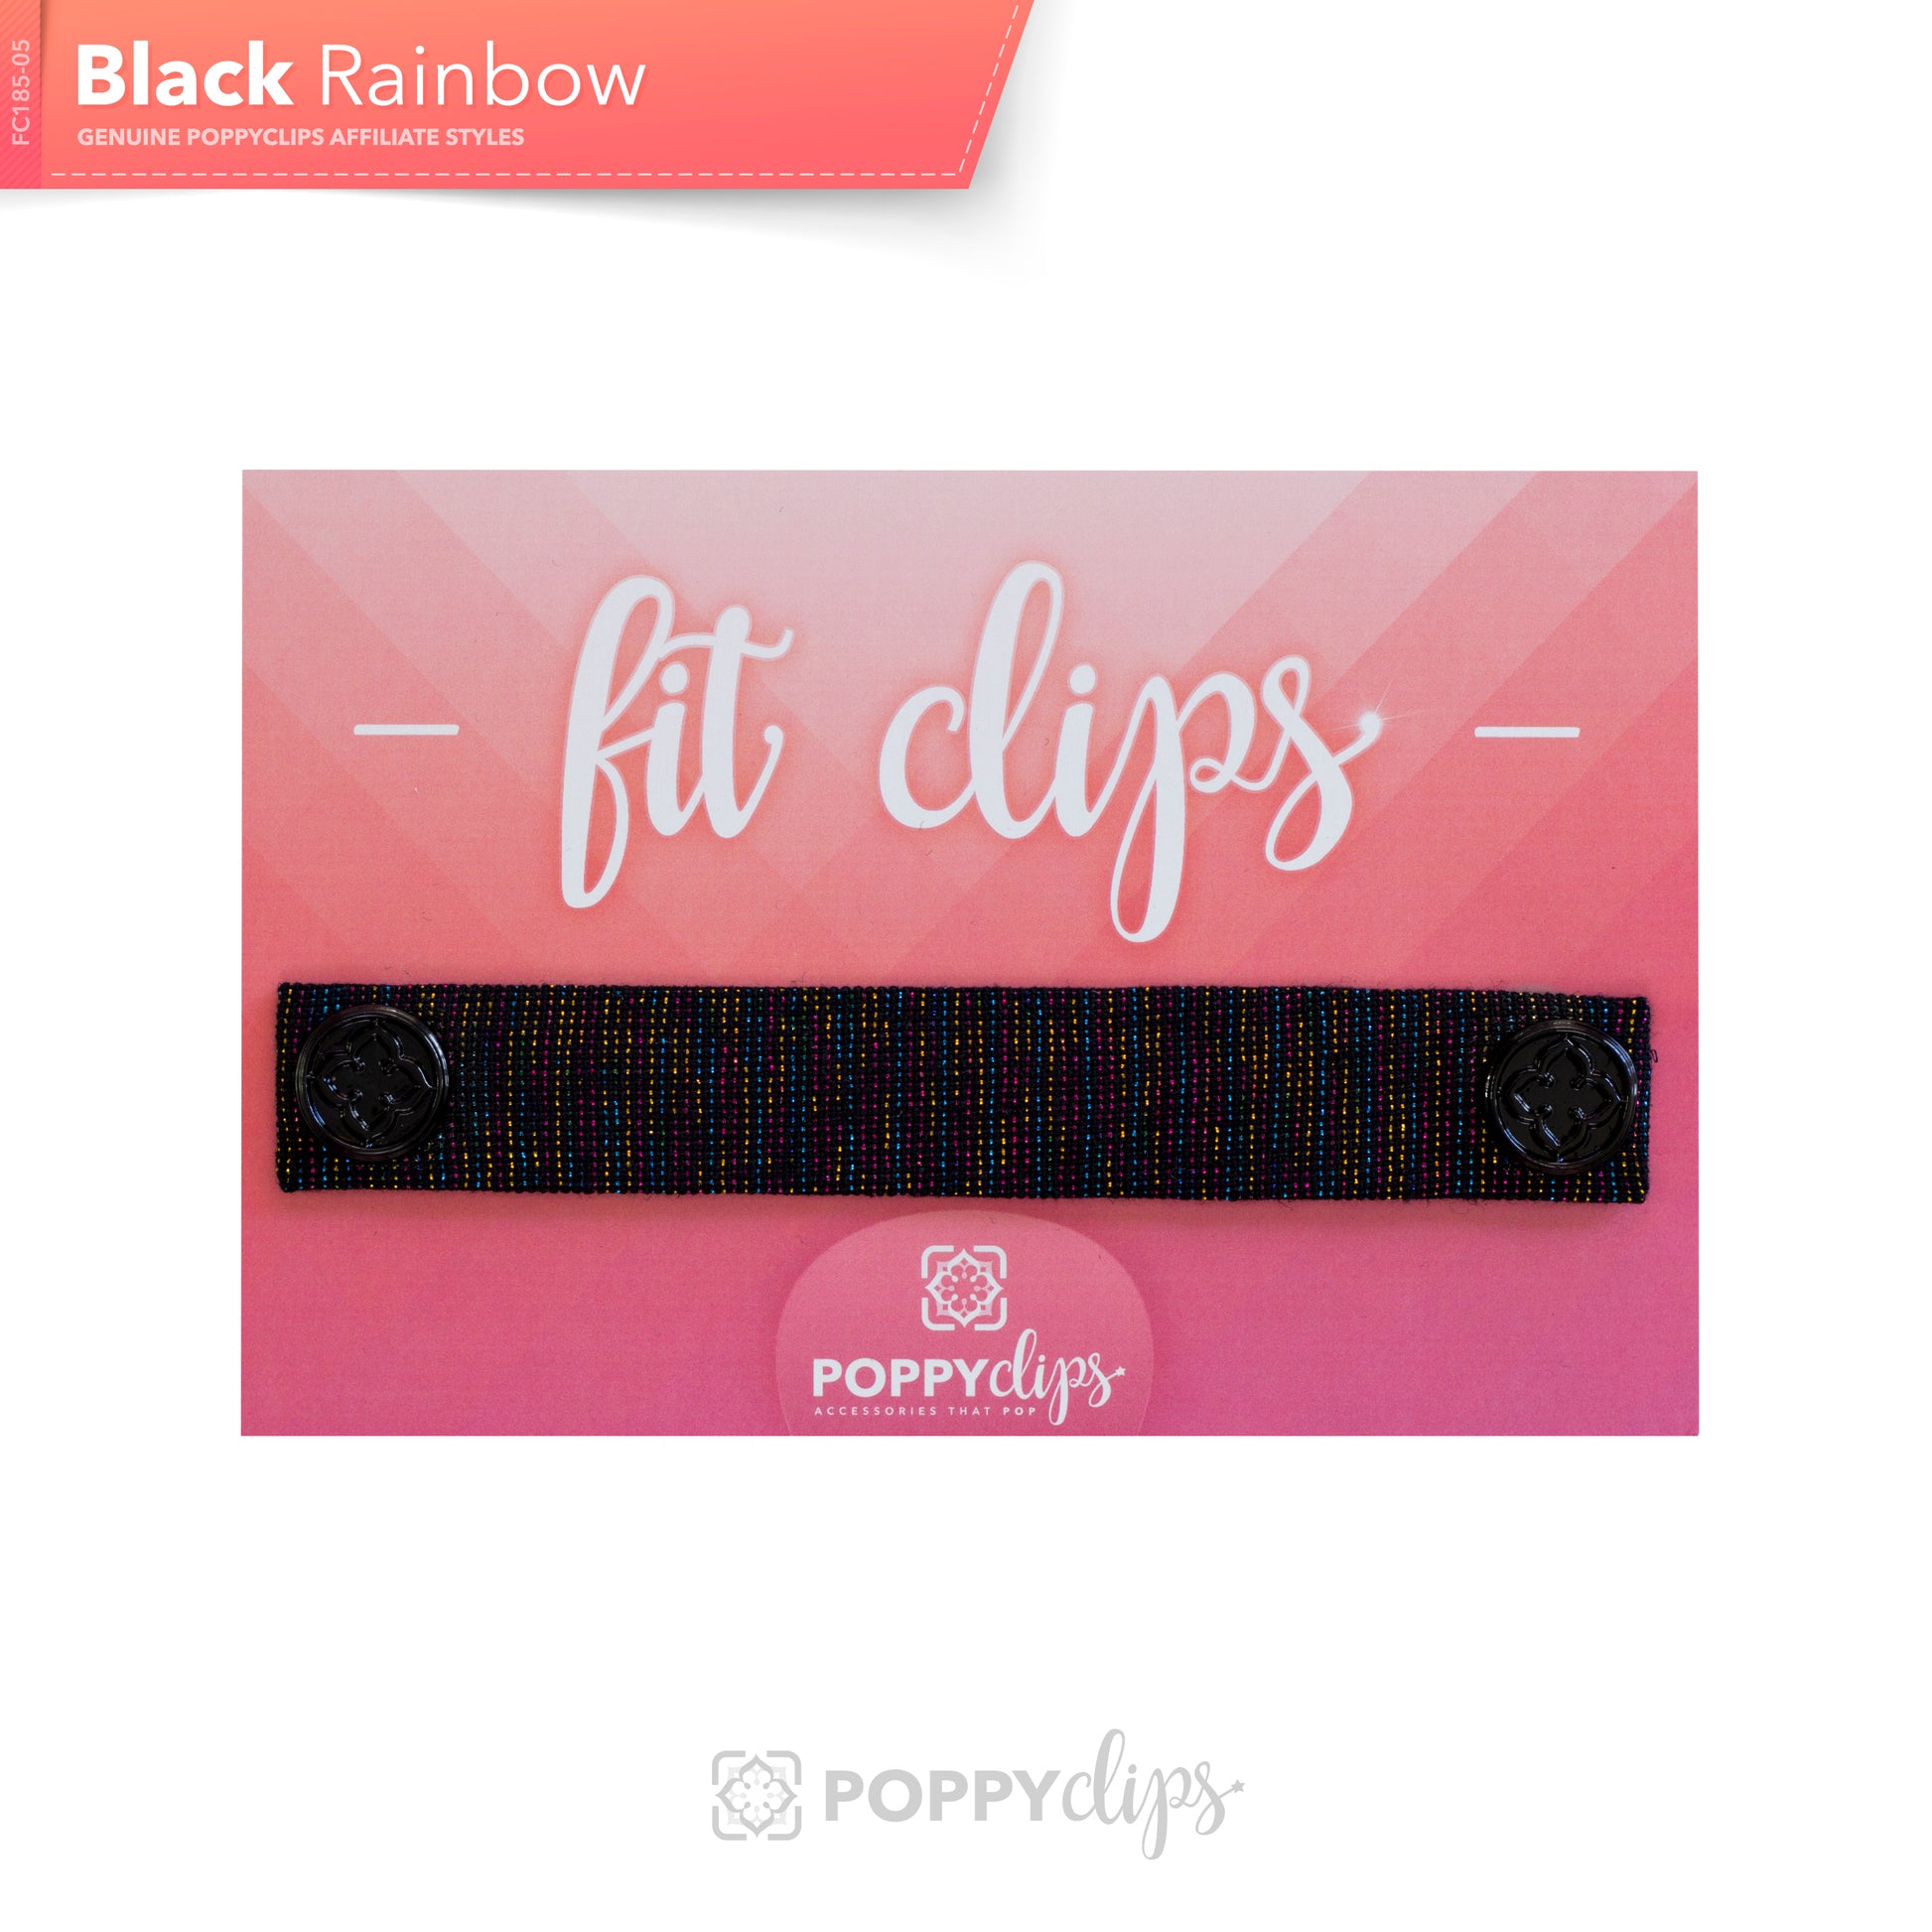 5 ¼” long by 7/8” wide black material with metallic rainbow threads woven in, and a magnet at each end.  The outer magnets are a decorative black medallion with the company logo. 